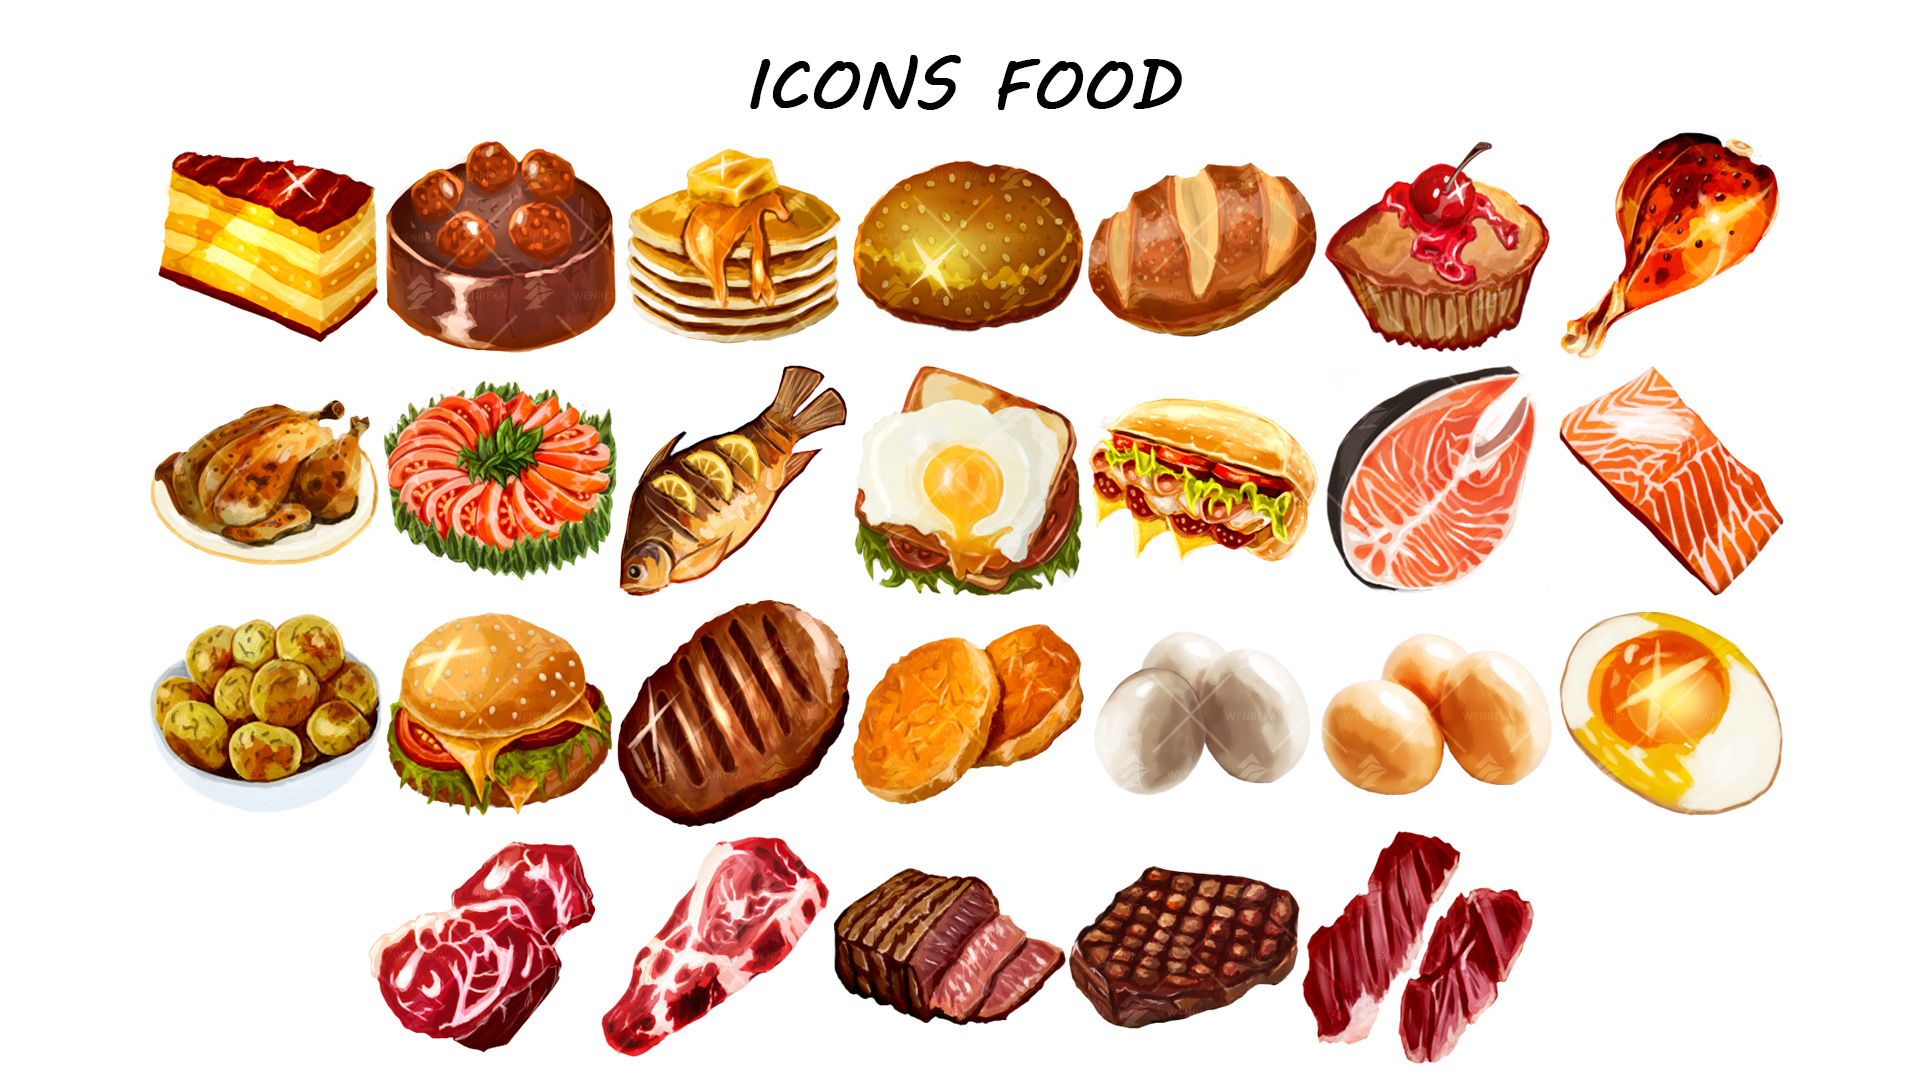 Assets: Food Icons & Inventory